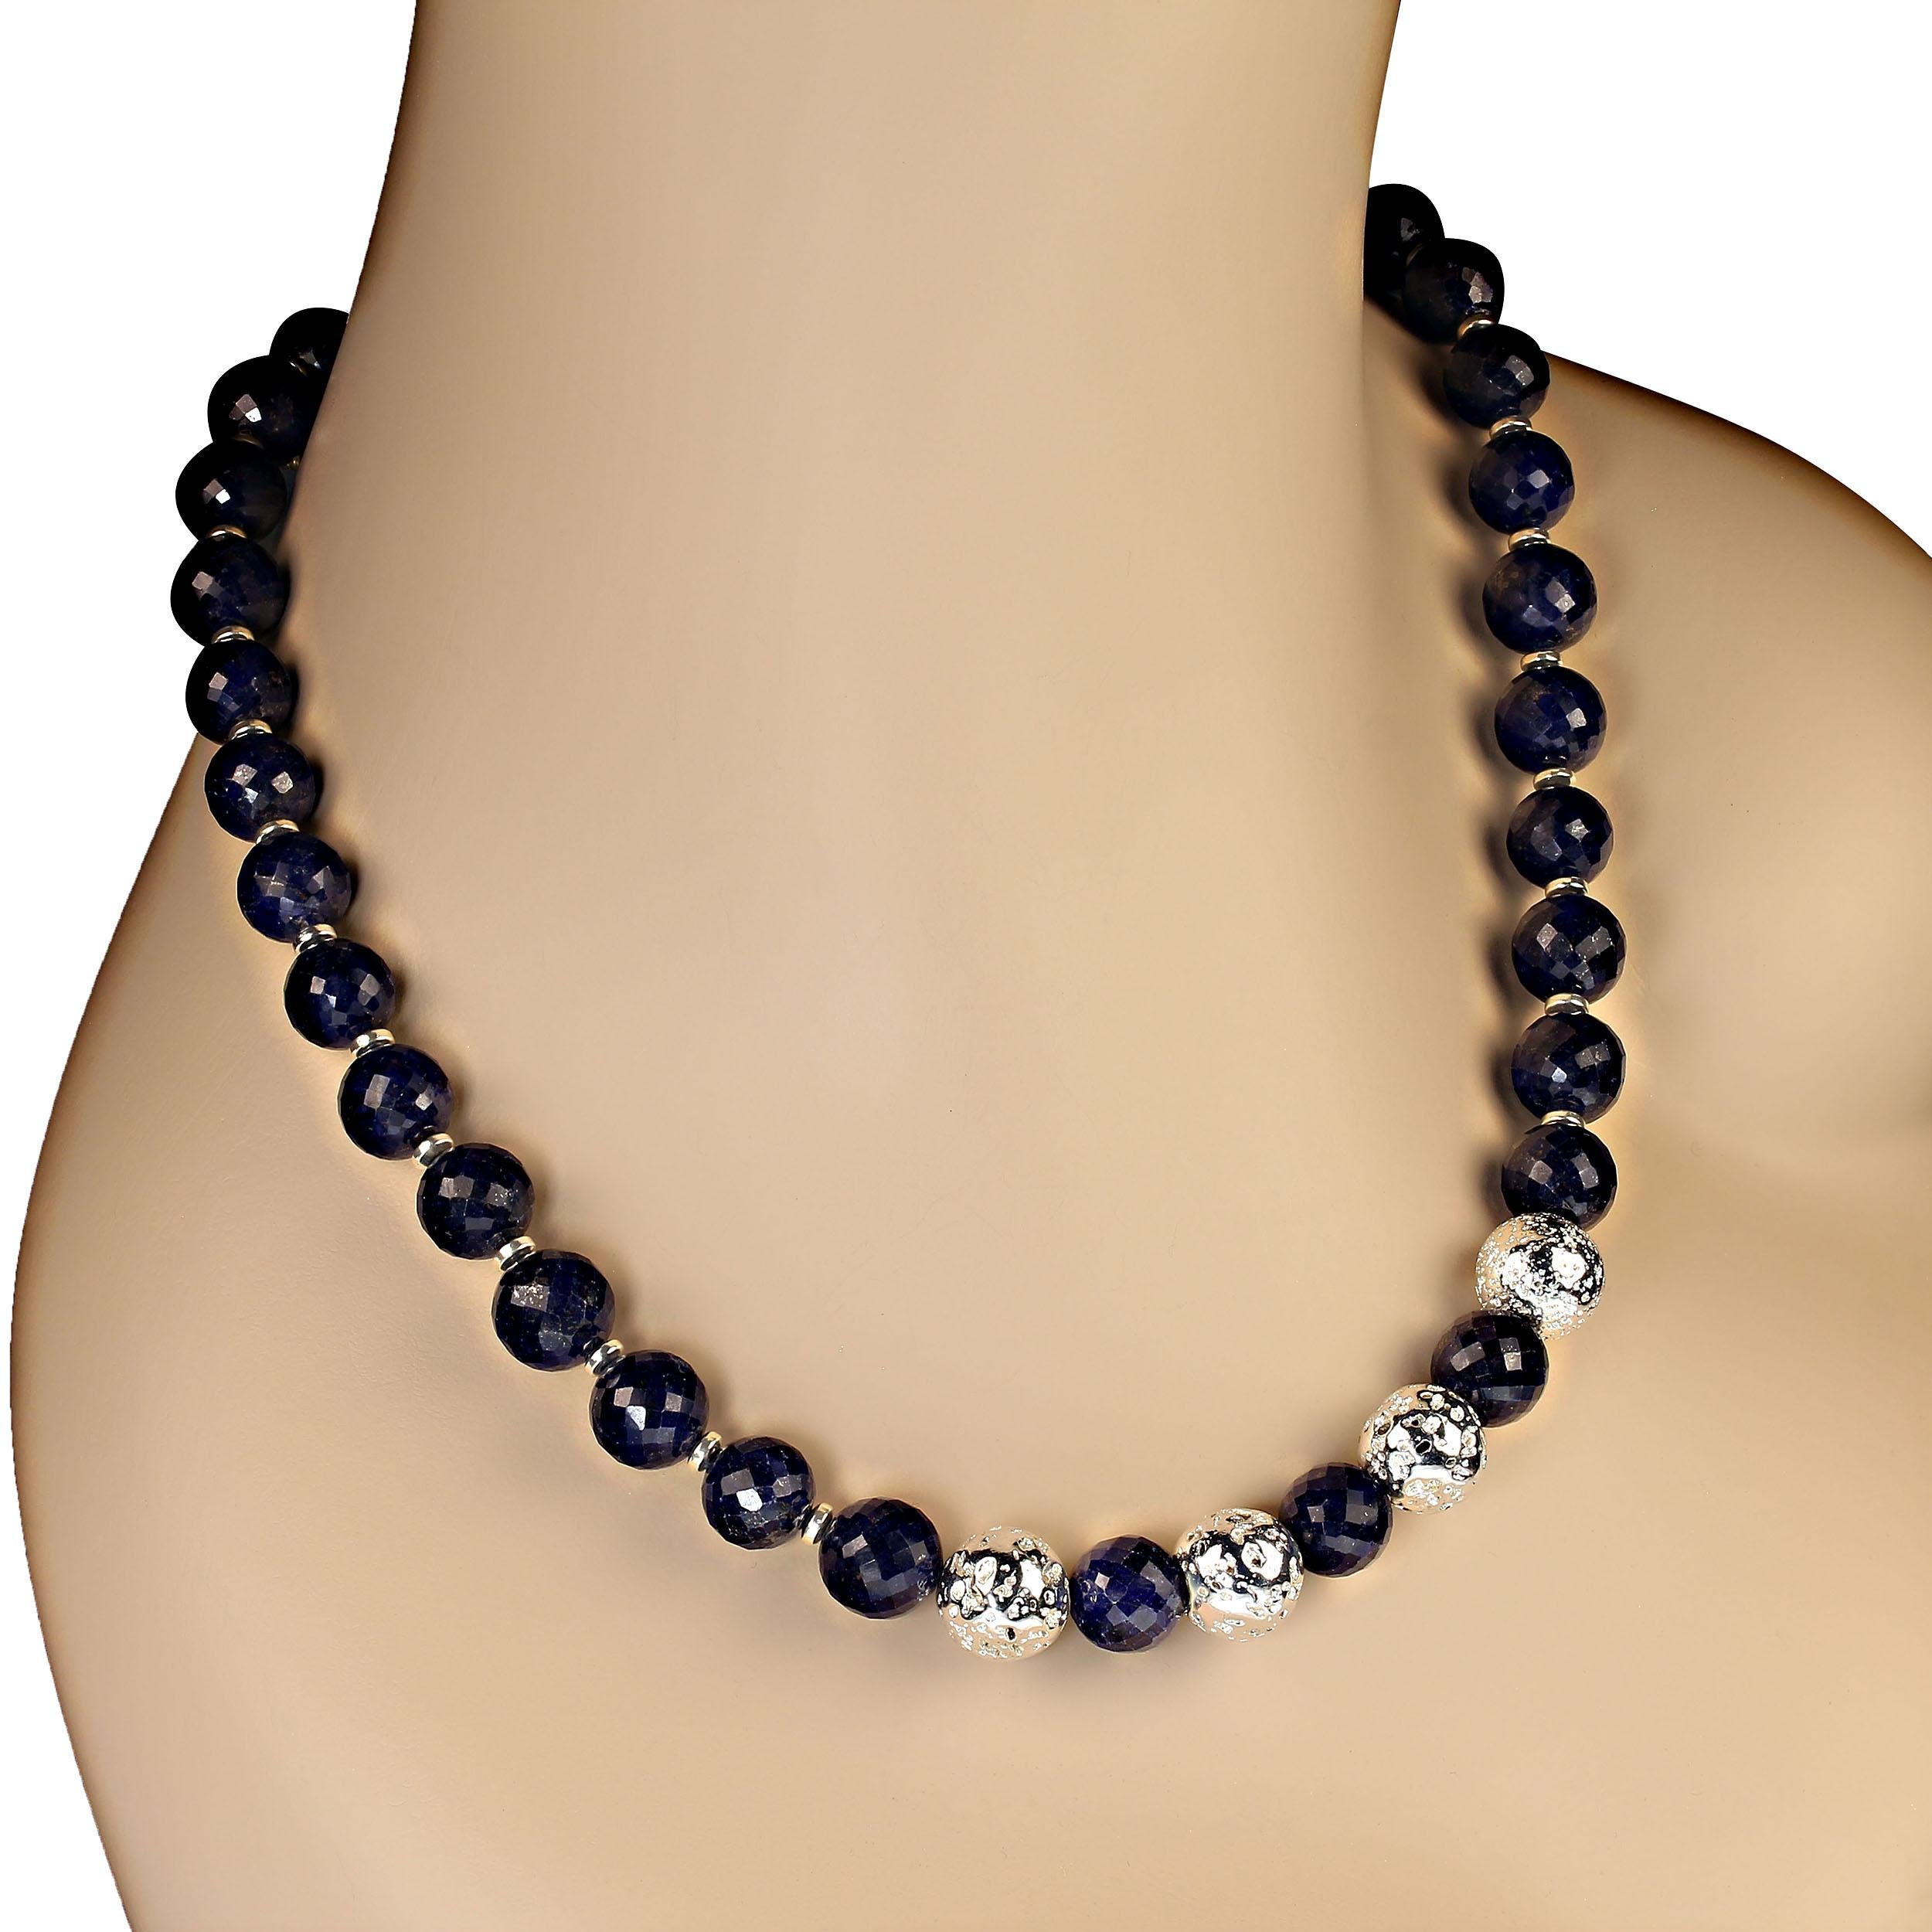 21 Inch blue sapphire necklace with silver lava rock focal accents.  These 11 mm blue sapphire beads are faceted and sparkle blue as they catch the light.  The silver accents between them also reflect light. There are four 13 mm silver lava rock